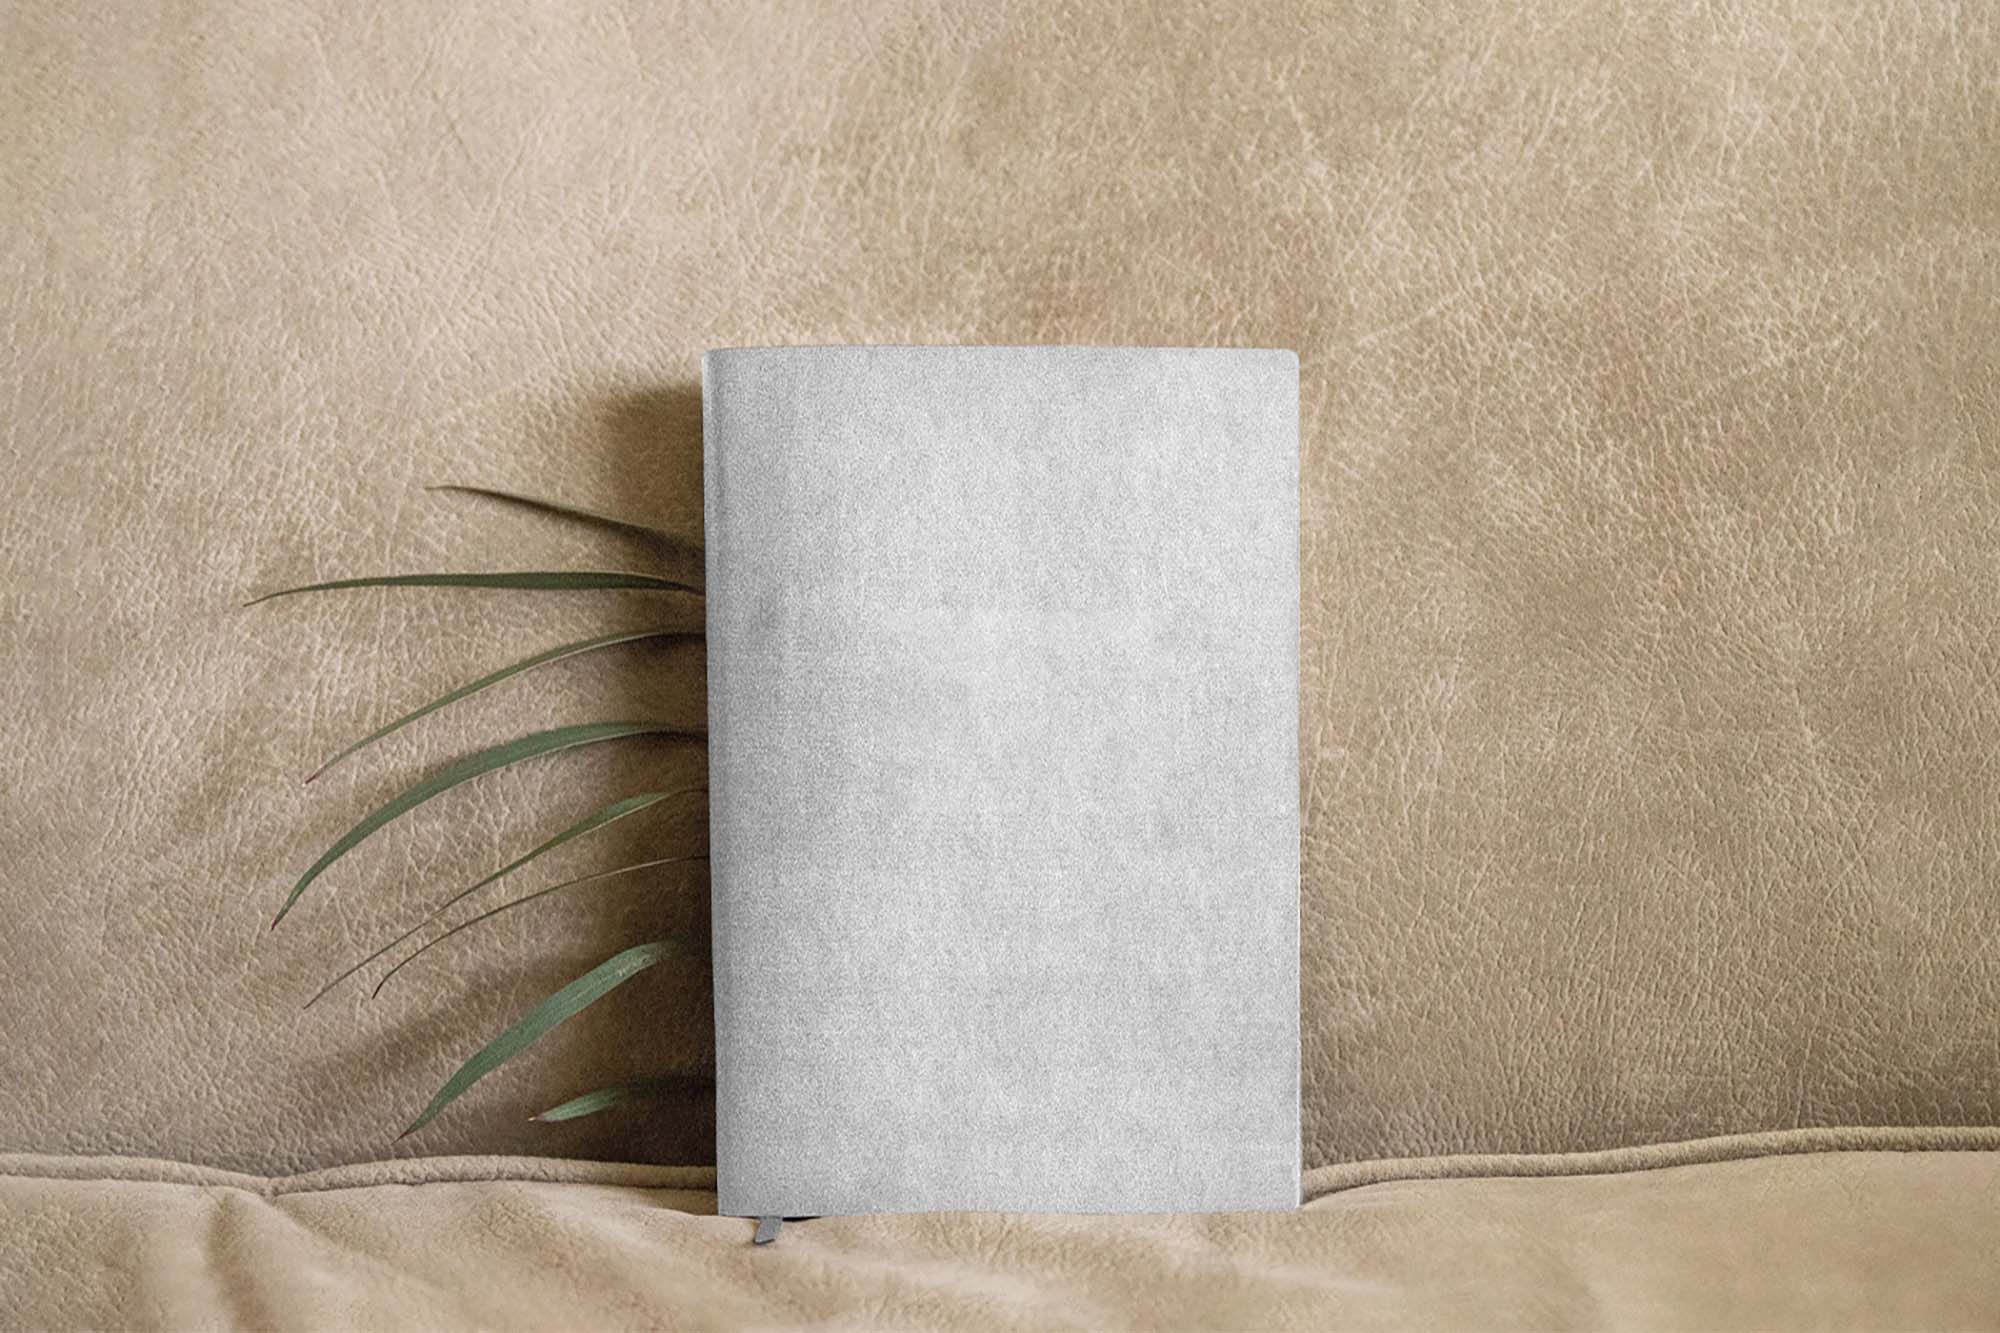 Free Leather Notebook Mockup PSD